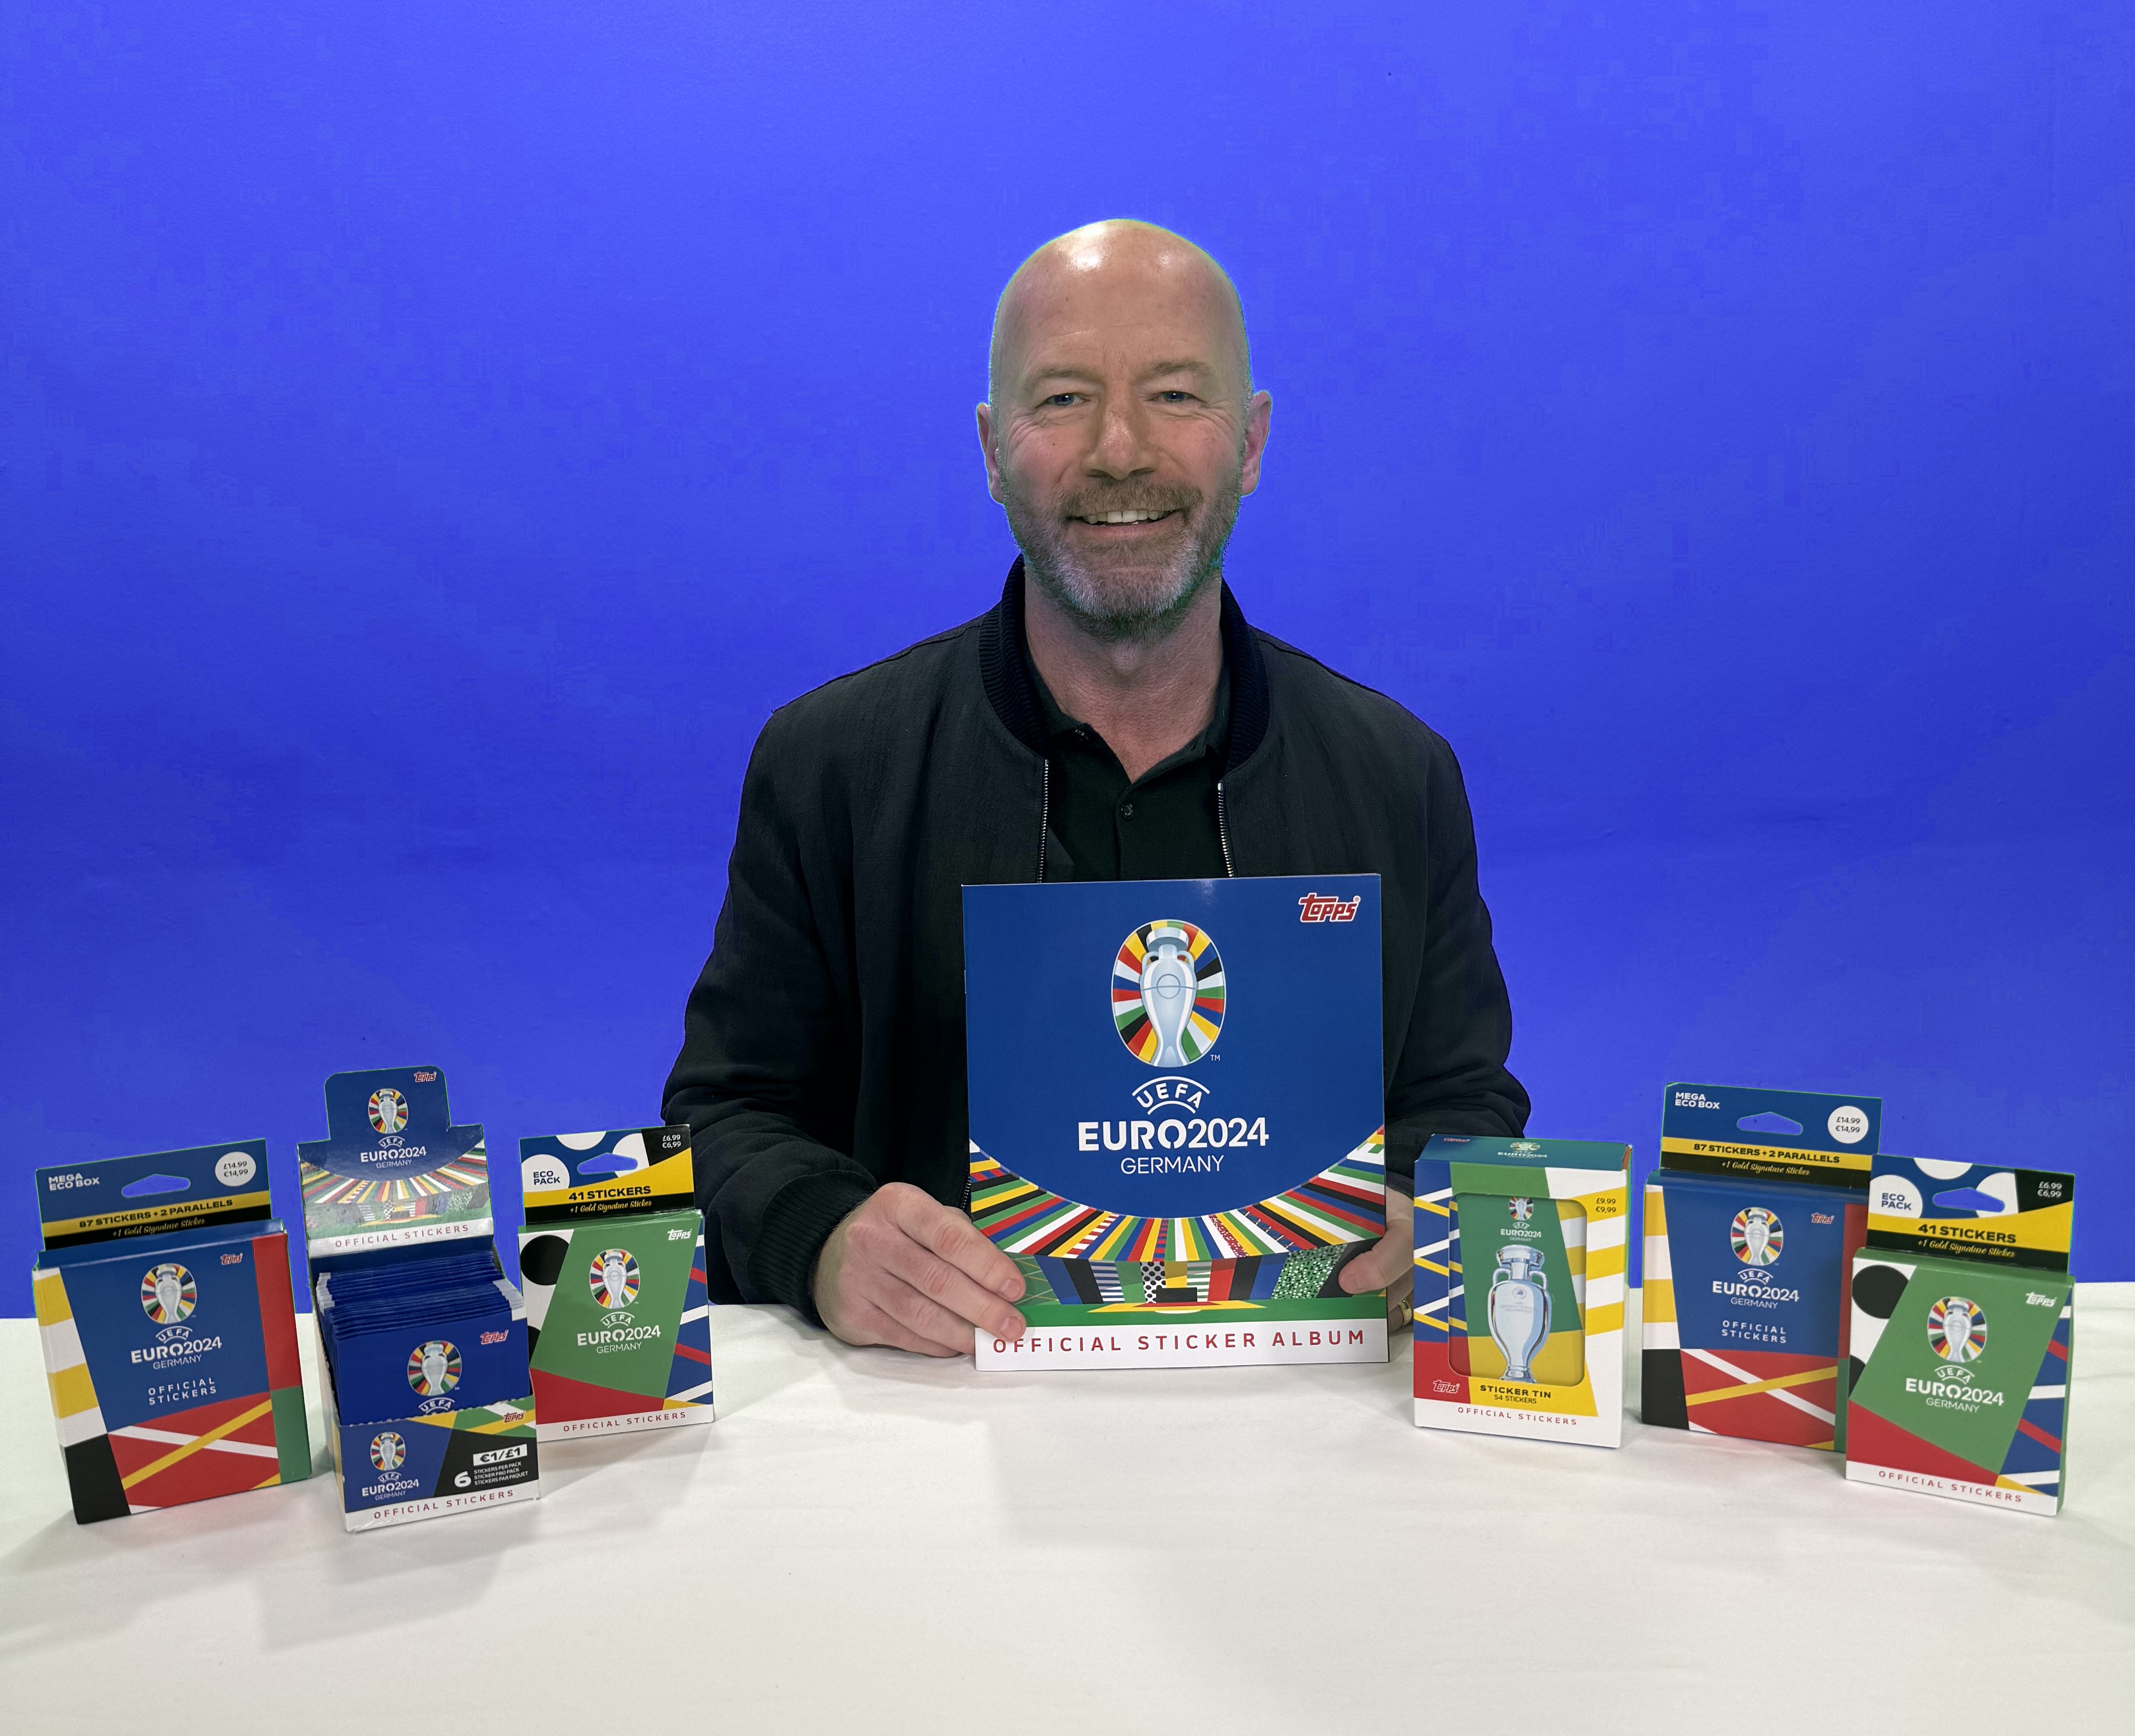 Alan Shearer was speaking as part of his work with Topps, who are the official cards and stickers supplier for UEFA EURO 2024